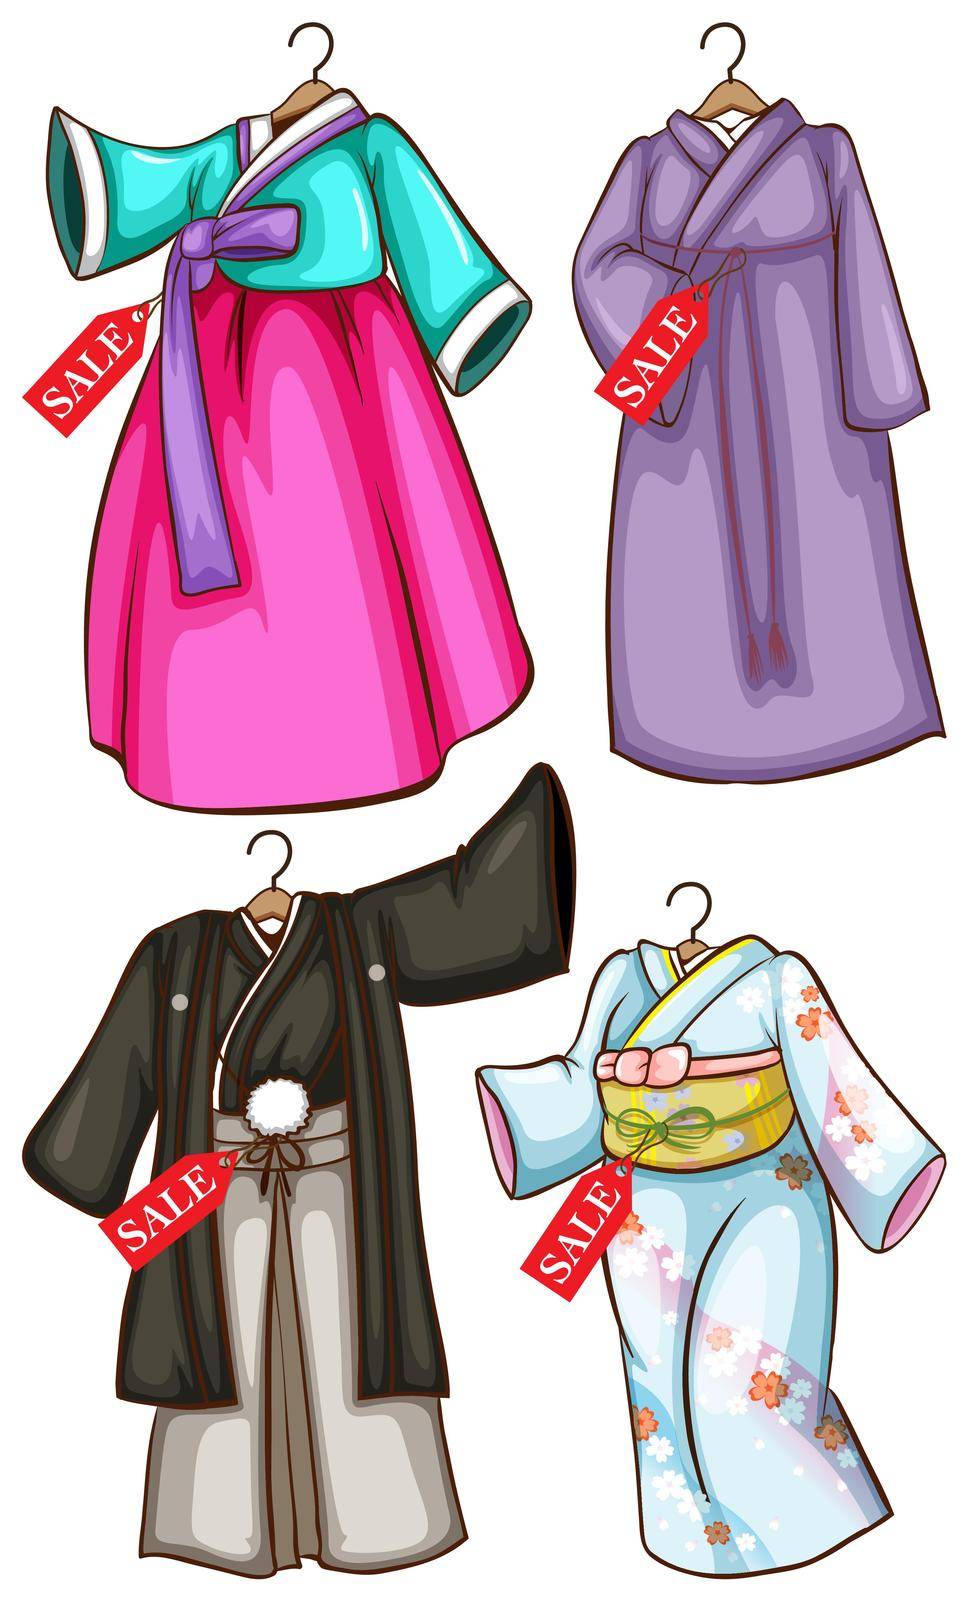 Asian costumes for sale on a white background